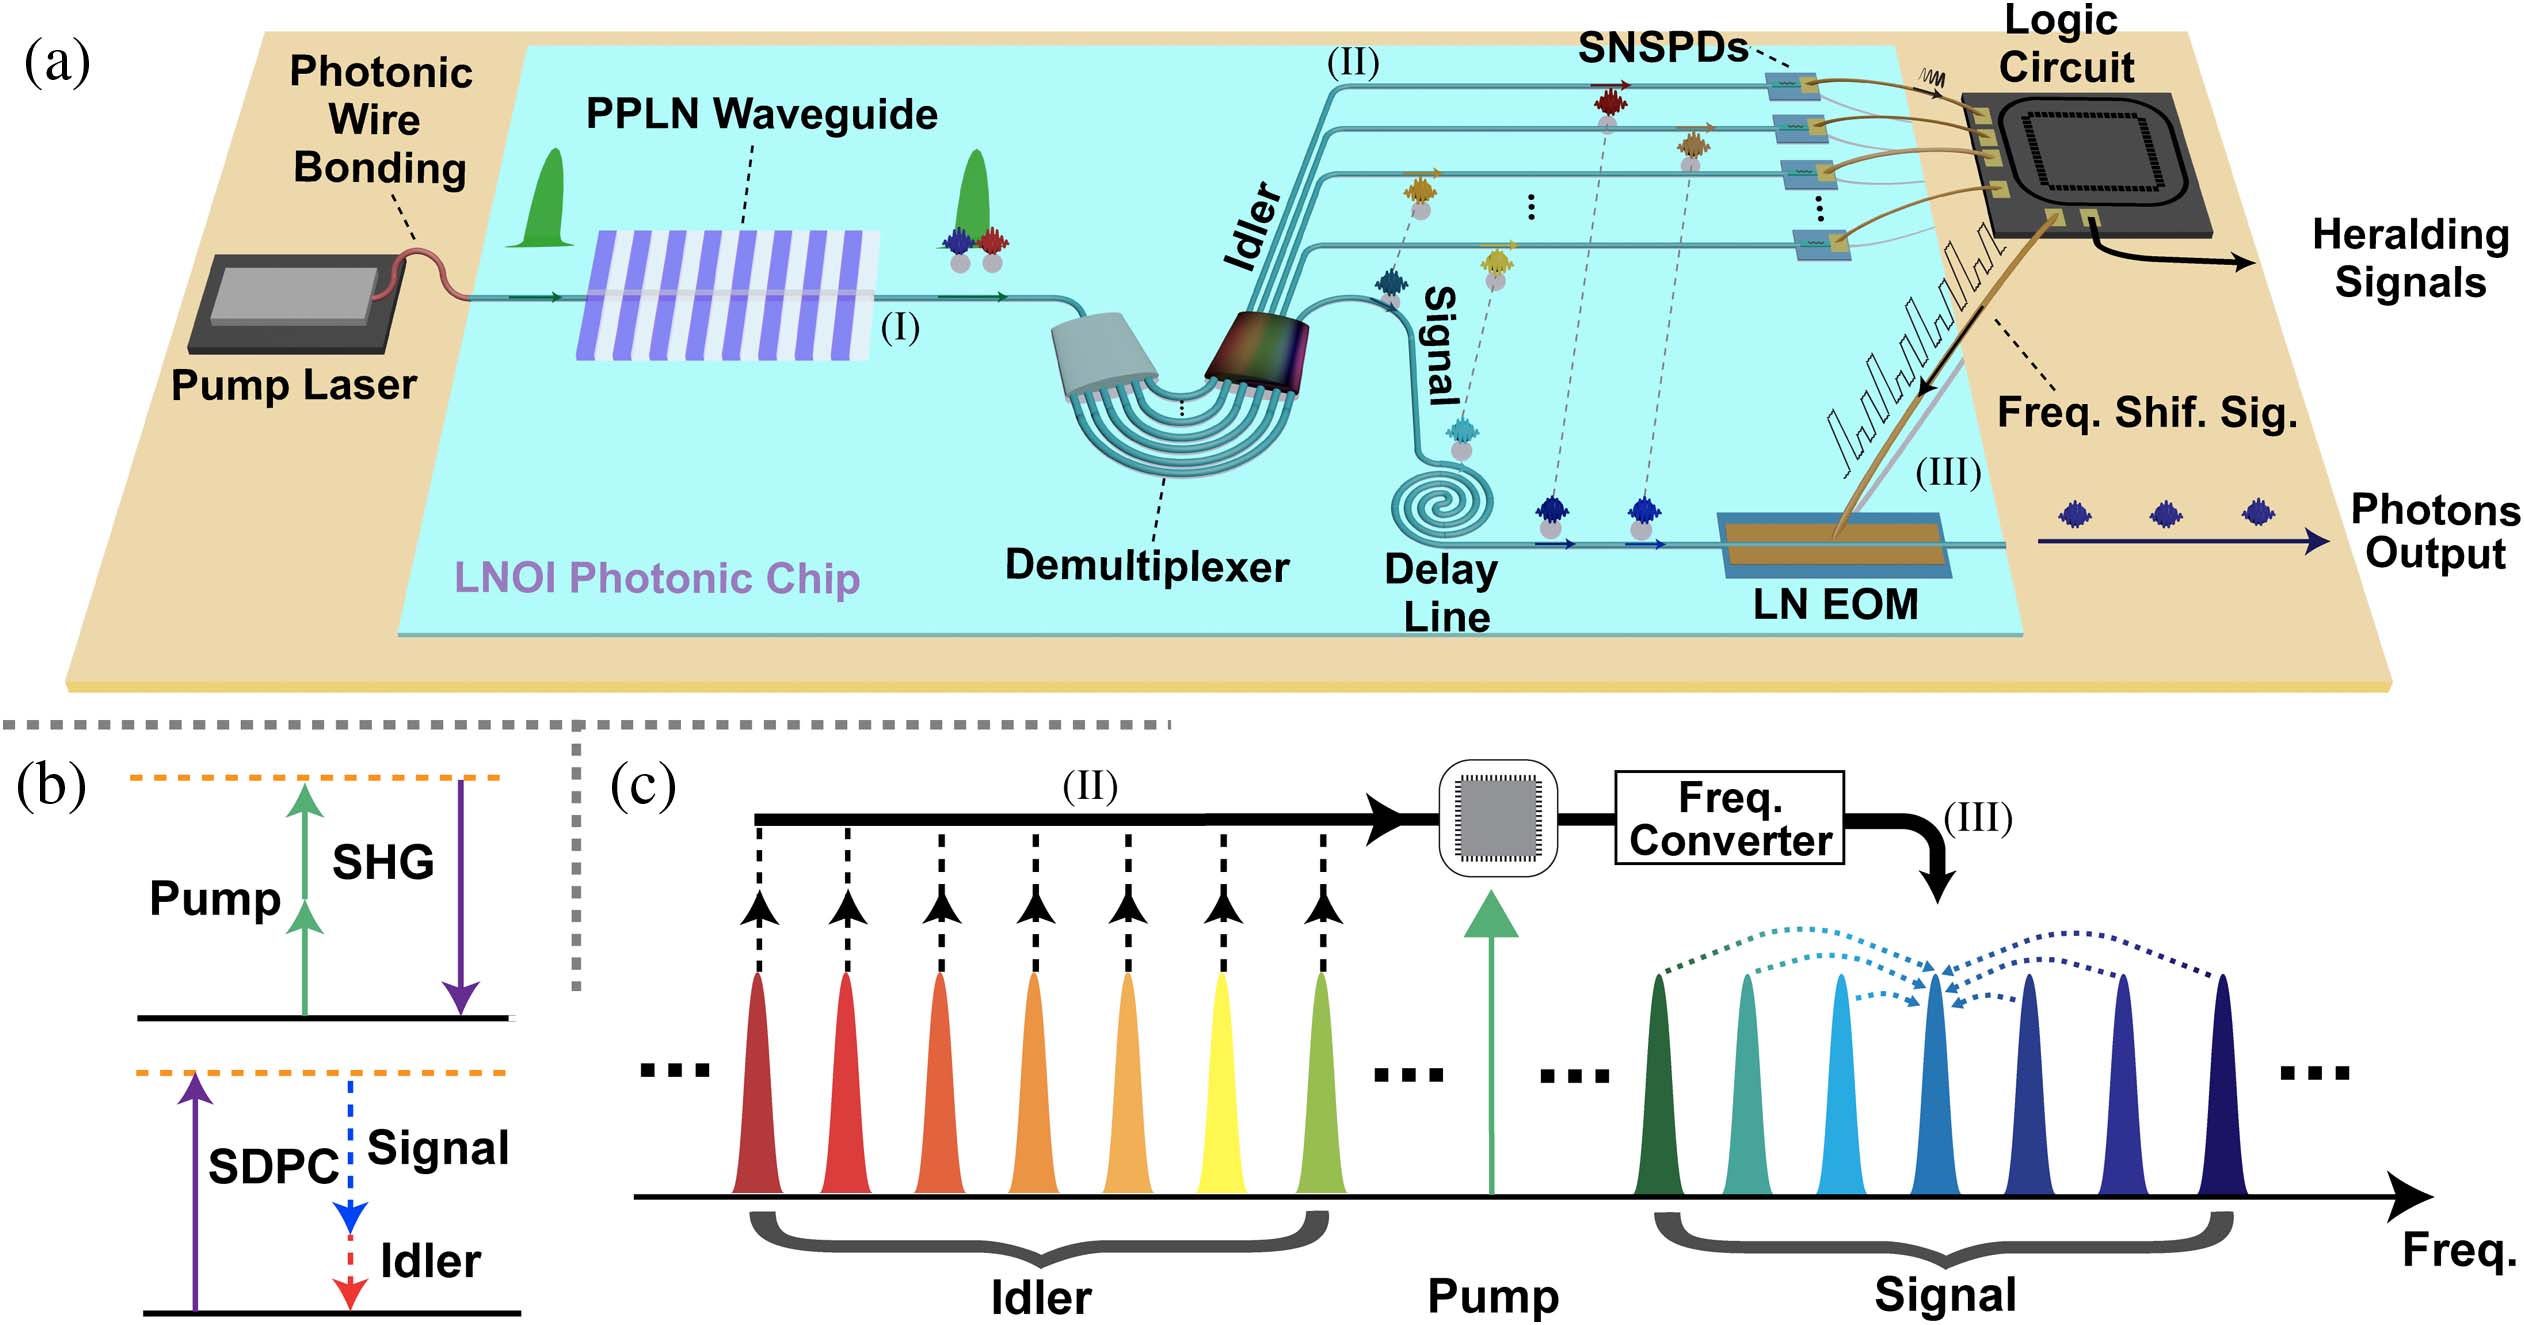 Principles of chip-scale LNOI-based spectrally multiplexed HSPS. (a) A view of future chip-scale LNOI-based spectrally multiplexed HSPS, in which all basic components are integrated on an LNOI photonic chip including pump laser module, (I) photon-pairs generation module, (II) filtering and detecting module, and (III) feed-forward and frequency shifting module. (b) Energy conservation graph of SHG and SPDC. (c) Illustration of multiplexing in frequency domain. Photon-pairs generation module (I) generates broadband correlated signal and idler photons through cascaded SHG and SPDC processes. Idler photons are filtered into different spectral modes and detected by SNSPDs in the filtering and detecting module (II). Detection signals are sent to the logic circuit. The logic circuit sends frequency shifting signal to the feed-forward and frequency shifting module (III), where signal photons are shifted into the common spectral mode. LNOI, lithium niobate on insulator; PPLN, periodically poled lithium niobate; LN, lithium niobate; EOM, electro-optic phase modulator; SNSPD, superconducting nanowire single-photon detector; Freq. Shif. Sig., frequency shifting signals; SHG, second-order harmonics generation; SPDC, spontaneous parametric downconversion.